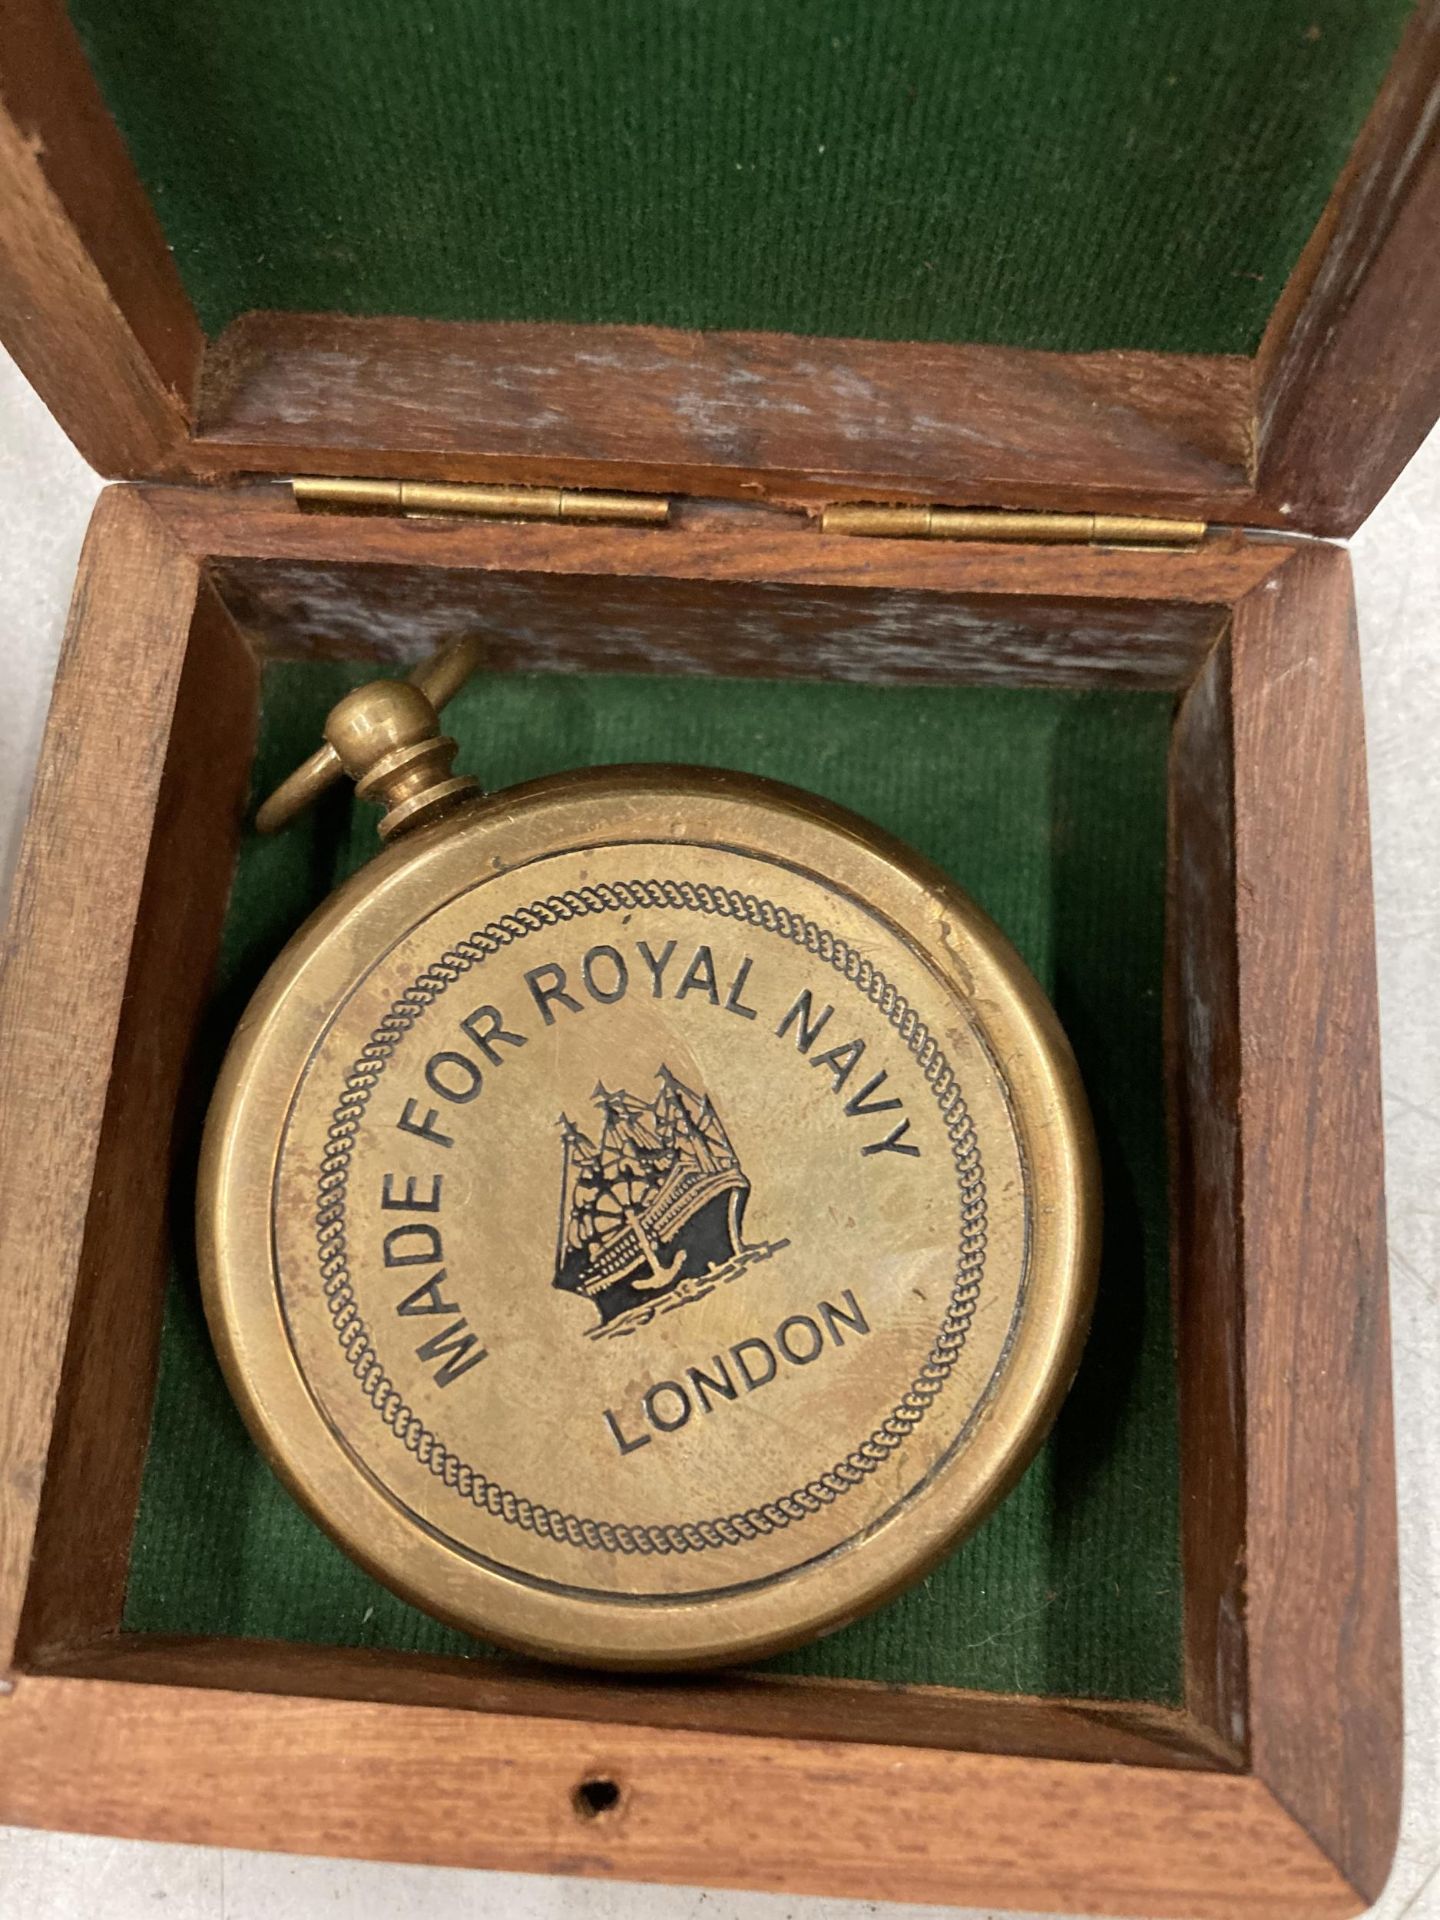 A VINTAGE STYLE 'MADE FOR ROYAL NAVY' COMPASS IN A WOODEN BOX - Image 3 of 3